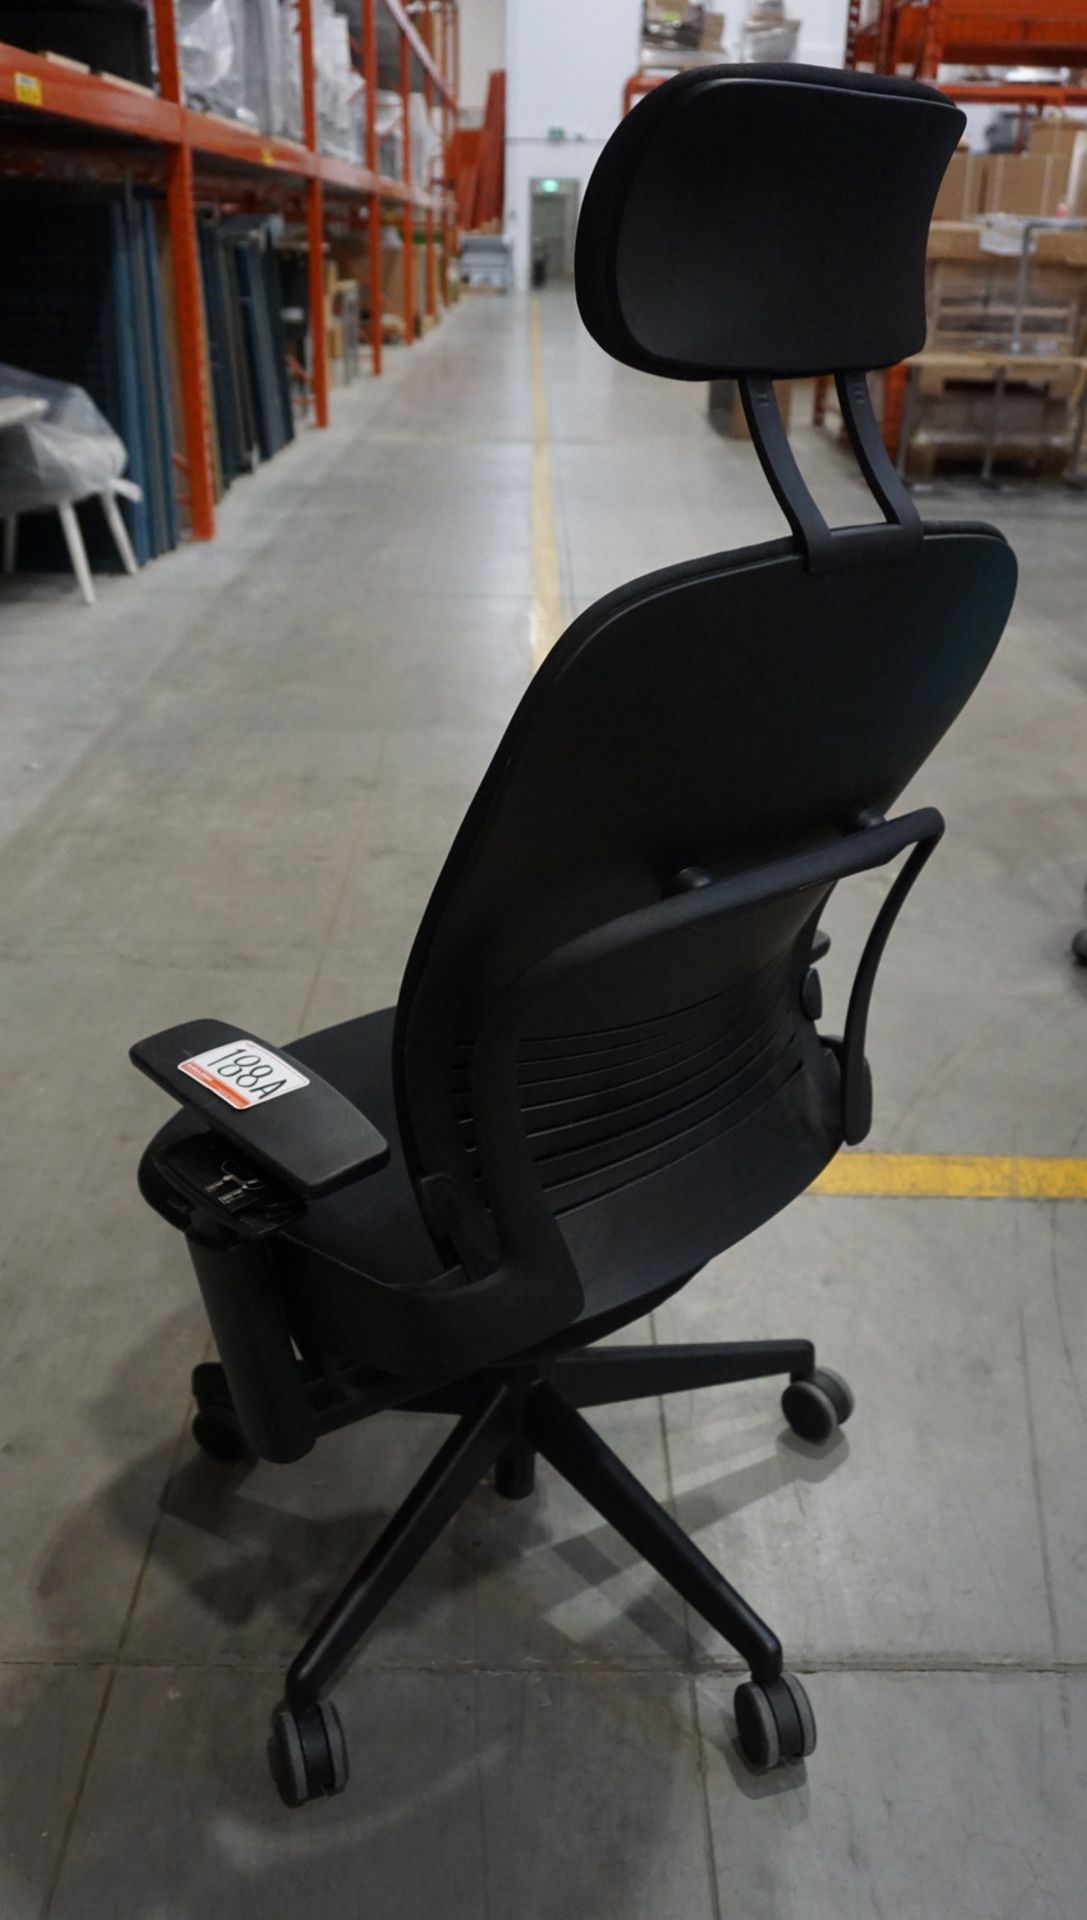 STEELCASE LEAP CHAIR W/ BLACK FABRIC, 4-WAY ADJ ARMS, & HEAD REST - Image 2 of 2